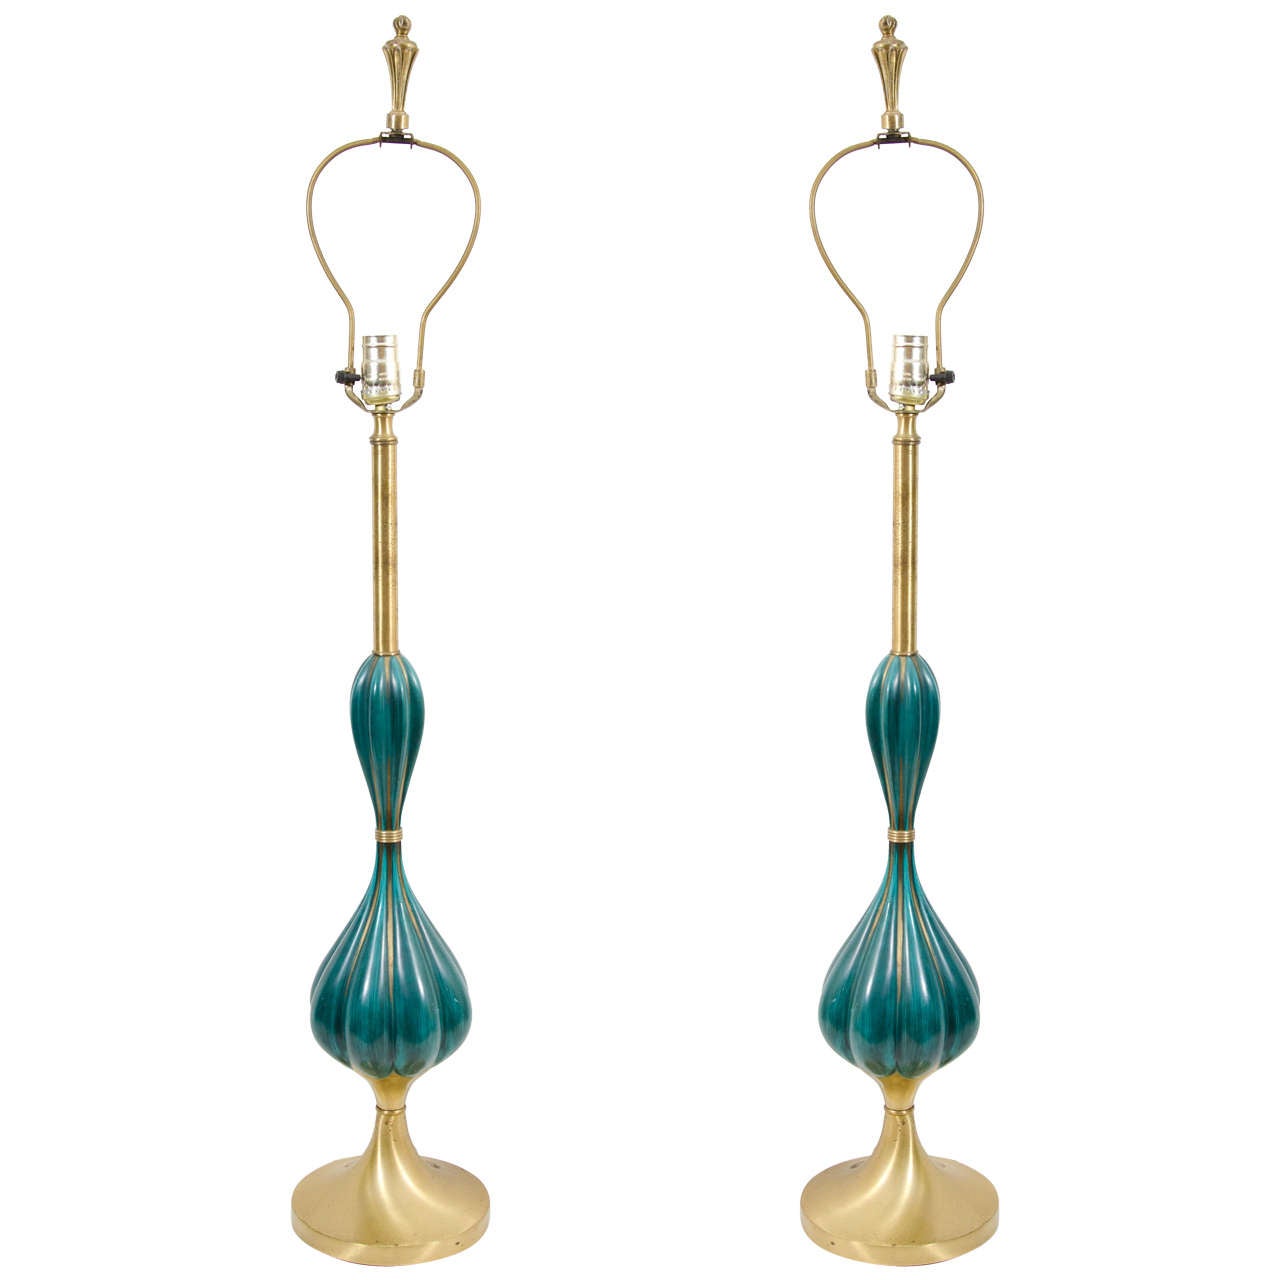 Pair of Turquoise Blue Enameled Brass Lamps